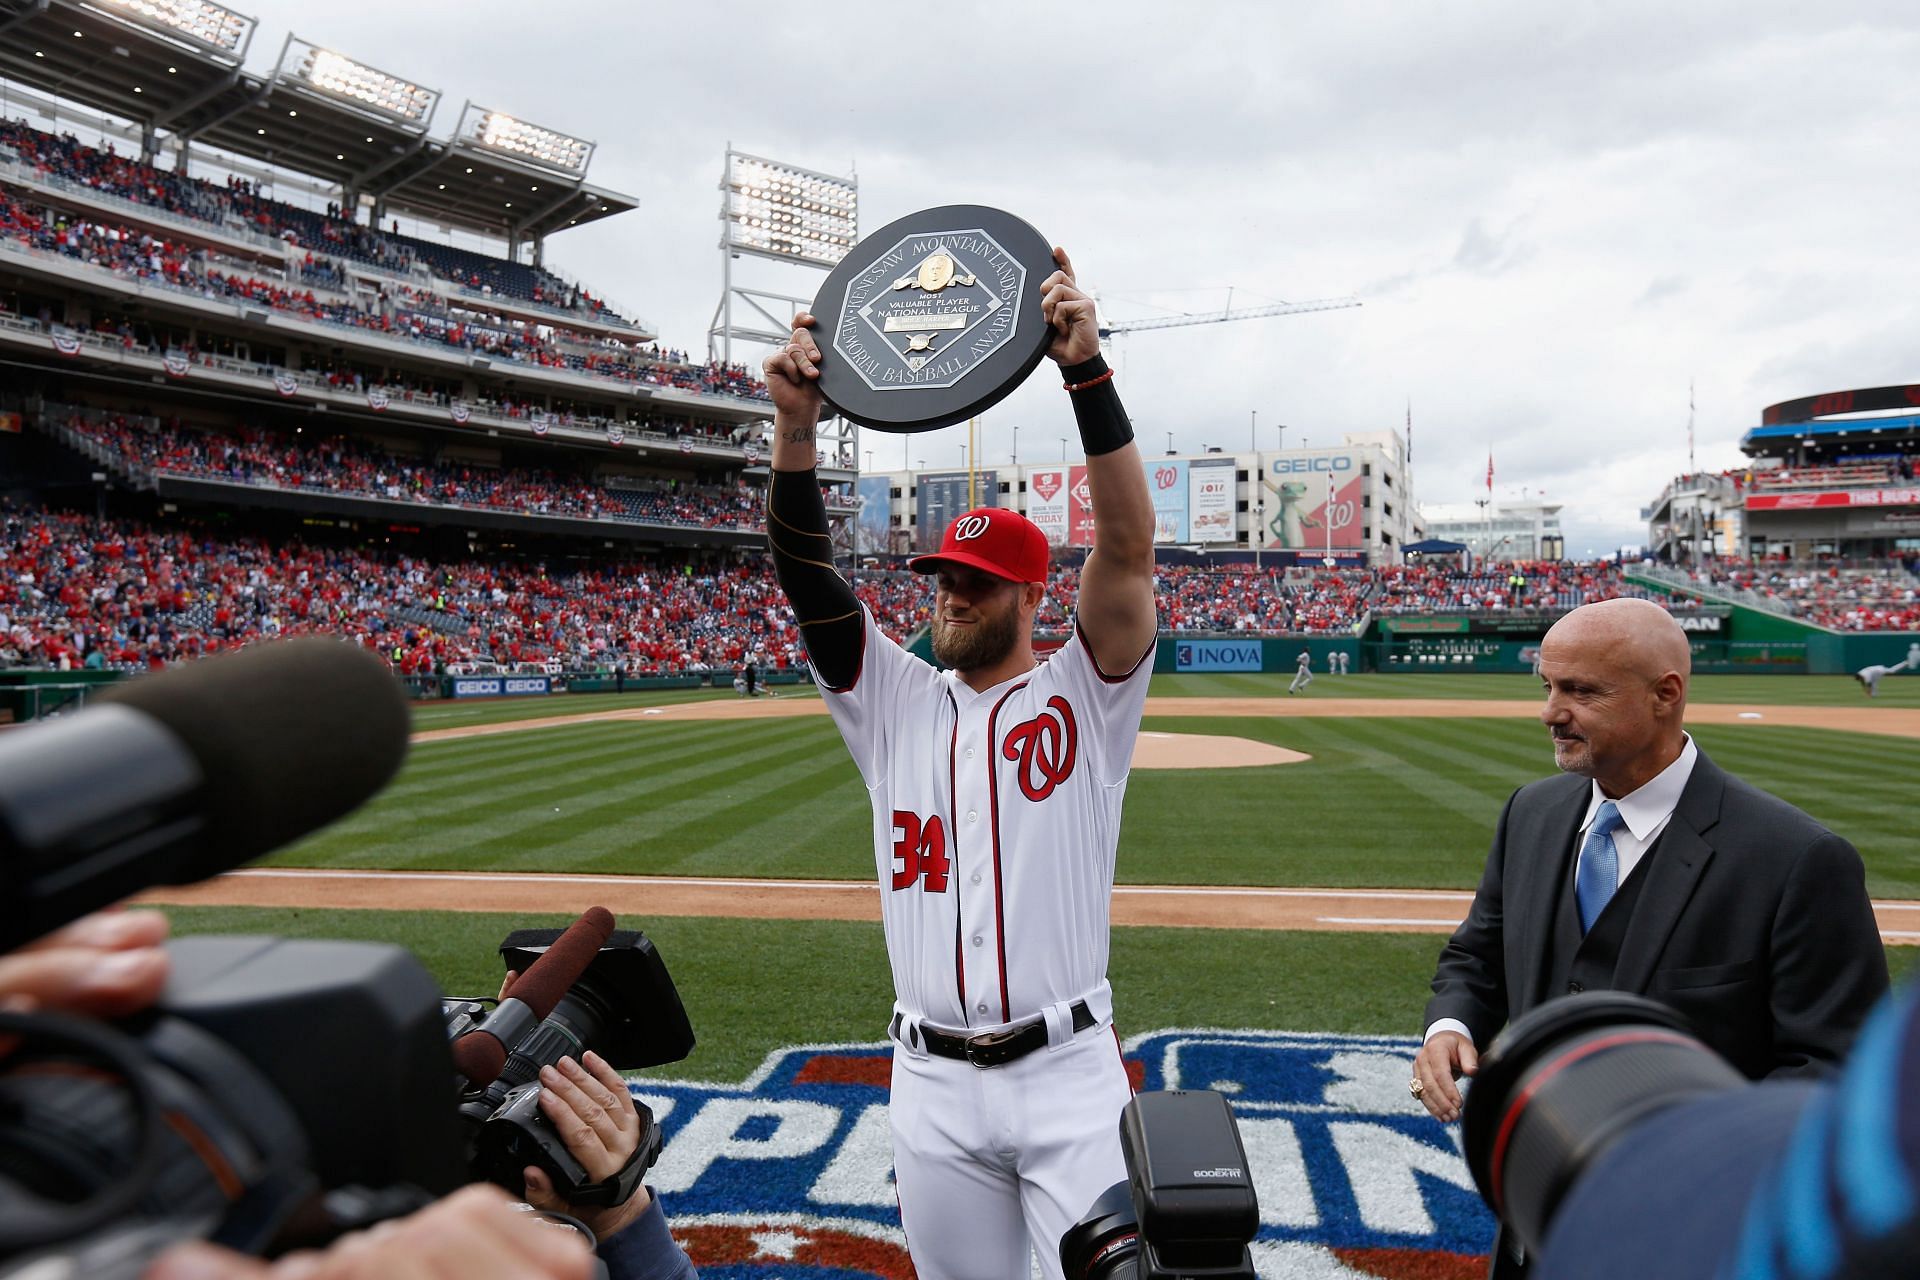 Bryce Harper with his first MVP award